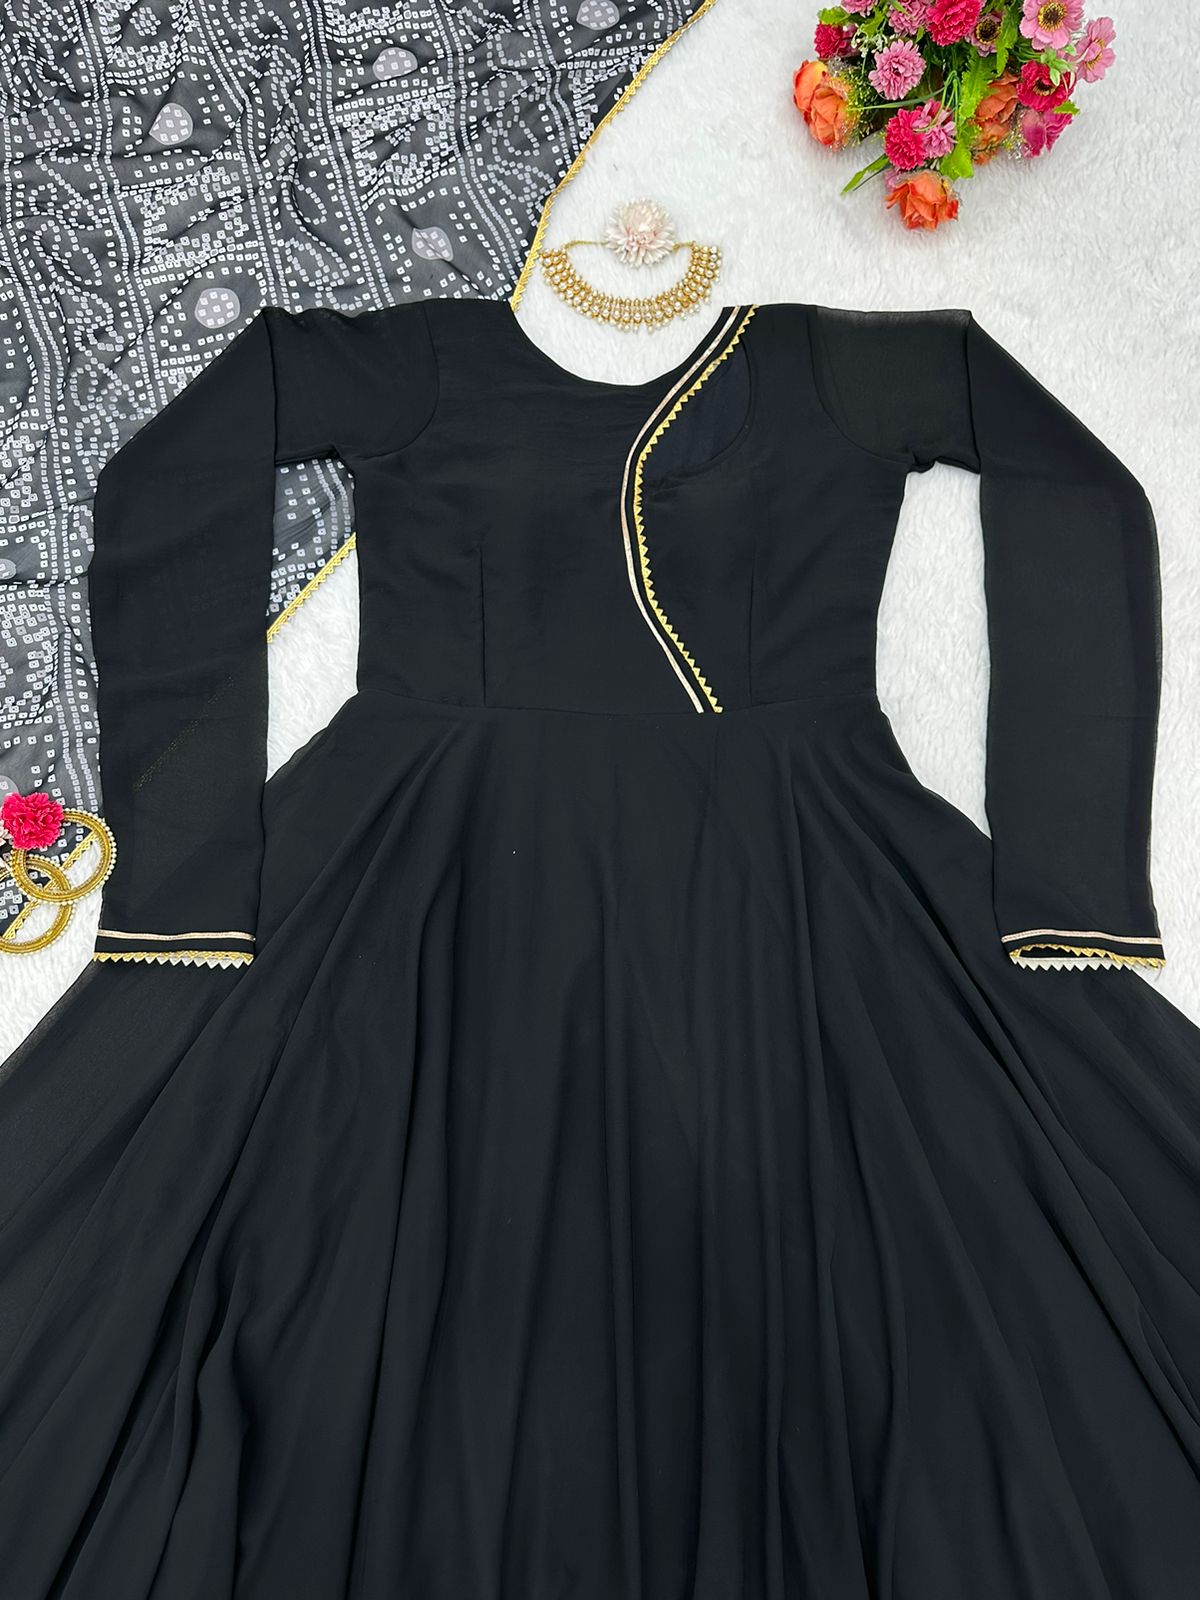 Buy Black Gown For Girls online in India